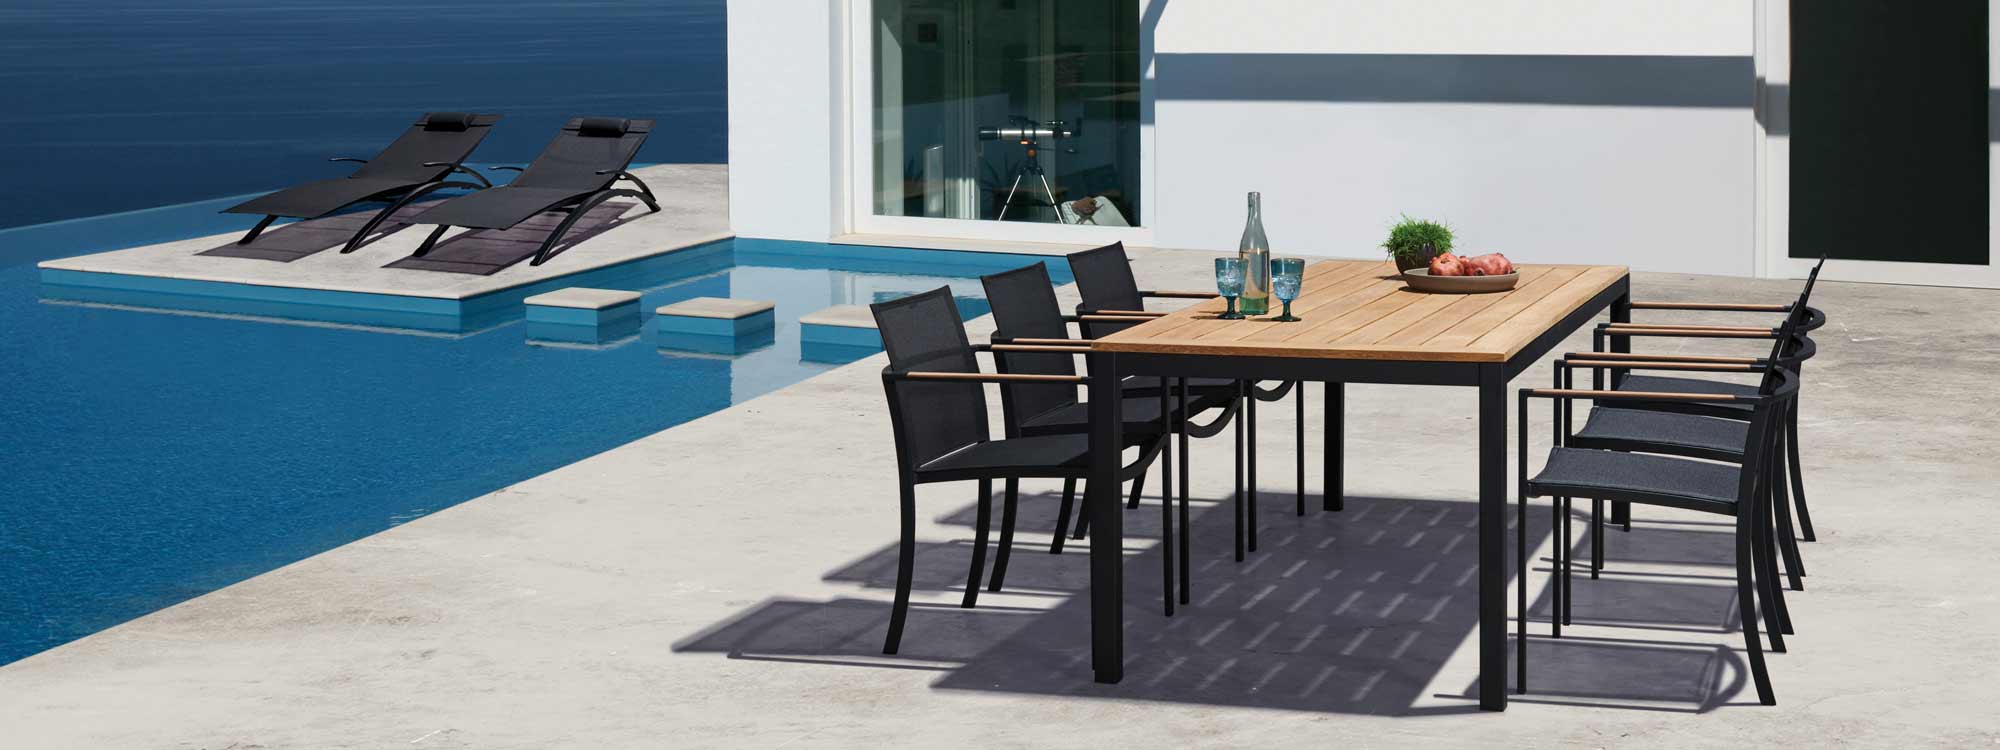 Royal Botania garden furniture collection includes a wide range of outdoor dining furniture such as Taboela table & O-ZON carver chair